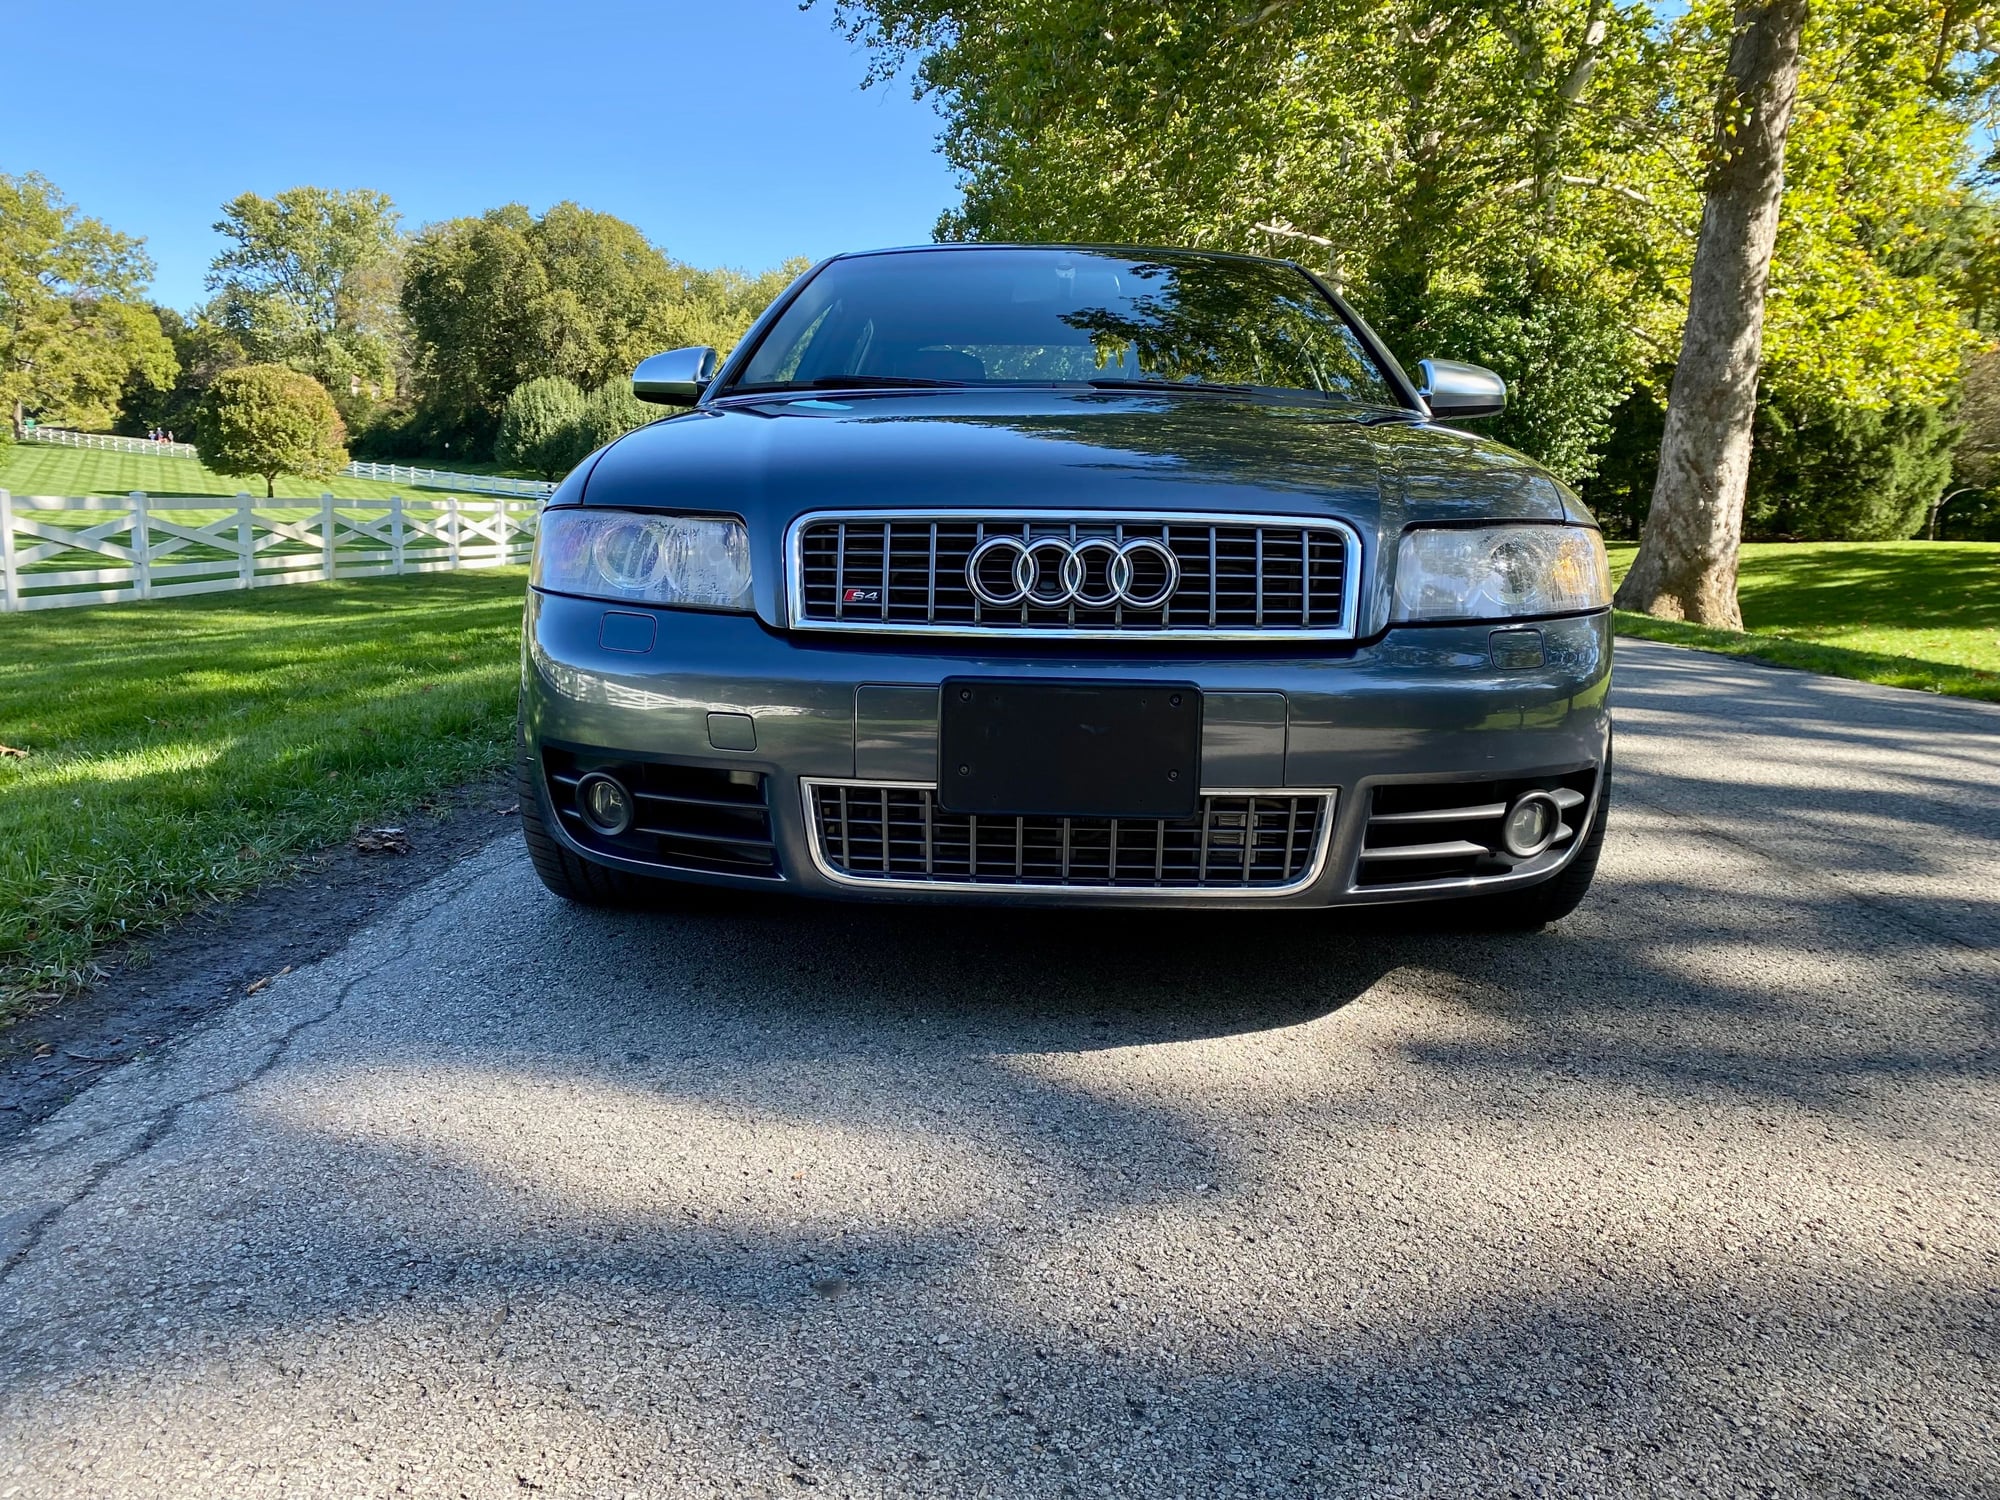 2005 Audi S4 - 2005 Audi S4 - Excellent Shape - Used - VIN WAUPL68E95A058826 - 86,449 Miles - 8 cyl - AWD - Automatic - Sedan - Gray - Indianapolis, IN 46220, United States